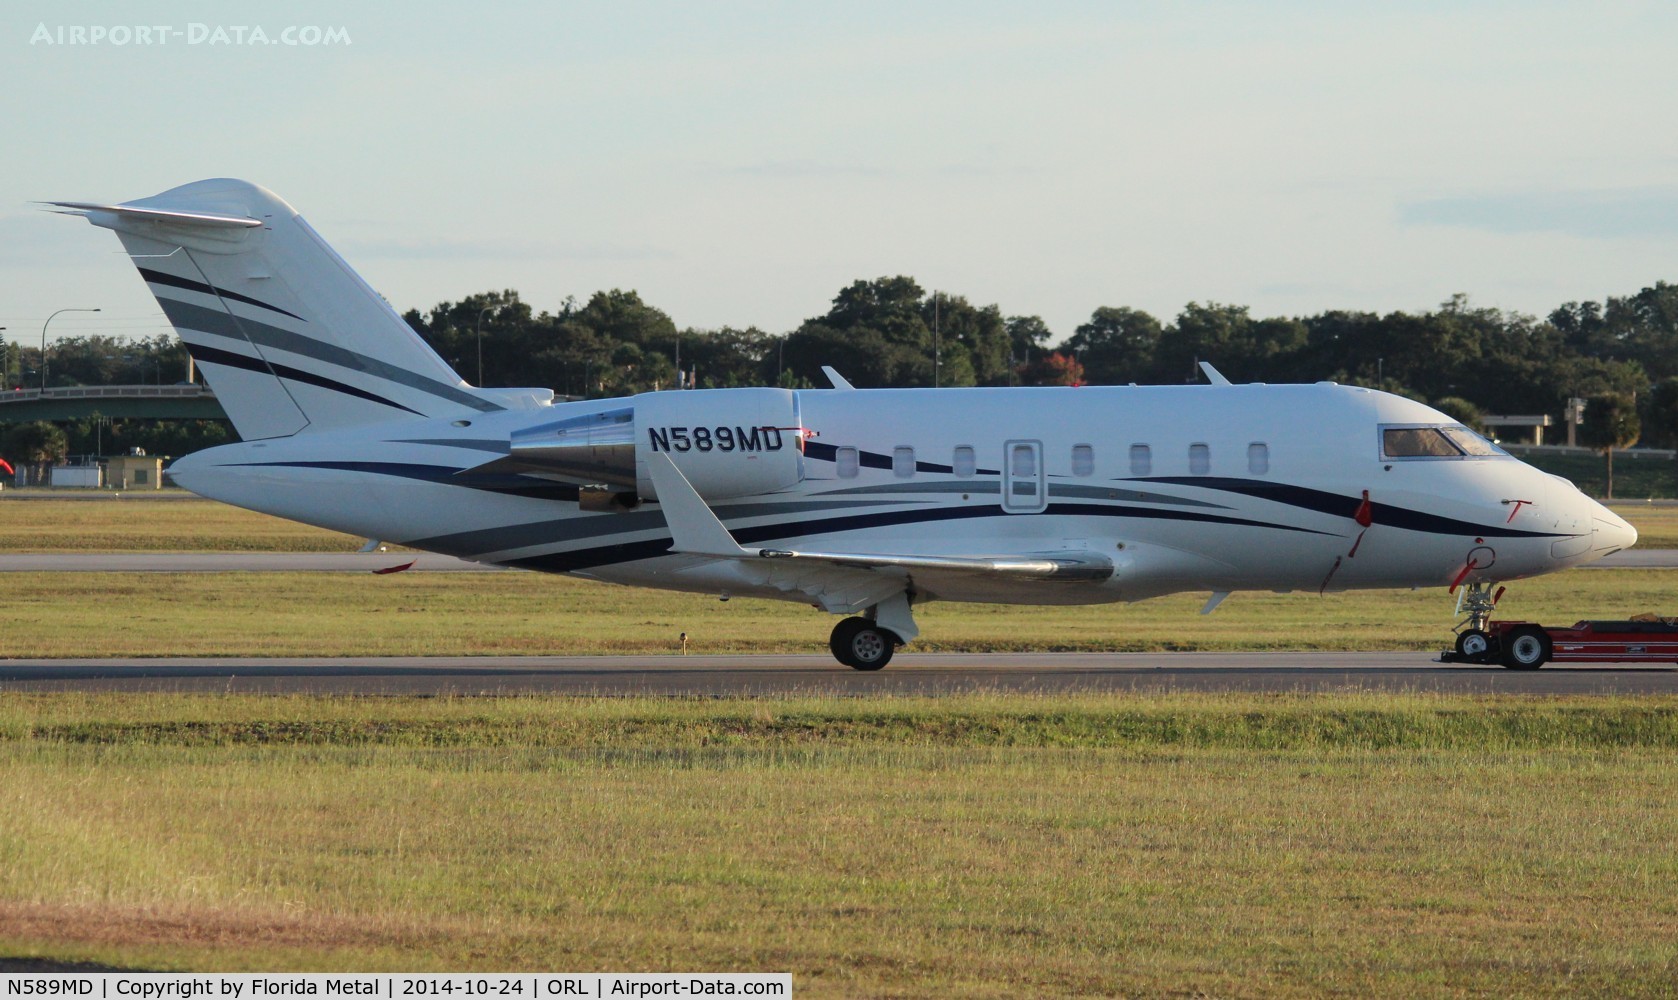 N589MD, 2013 Bombardier Challenger 605 (CL-600-2B16) C/N 5952, Challenger 605